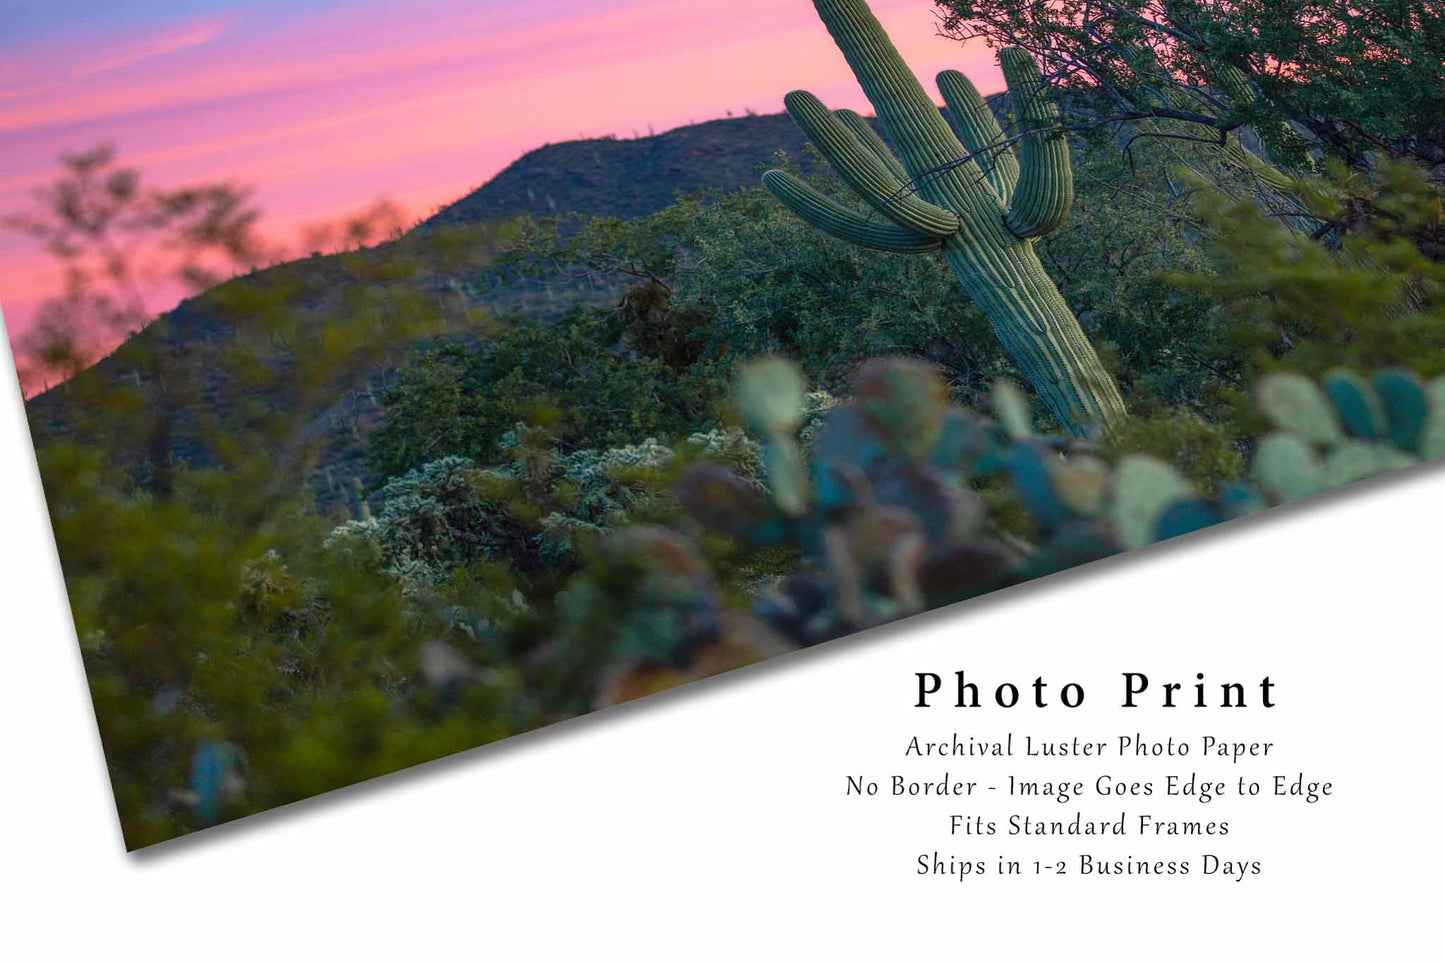 Southwest Photography Wall Art Print - Picture of Saguaro Cactus and Colorful Sky in the Sonoran Desert in Arizona Succulent Decor